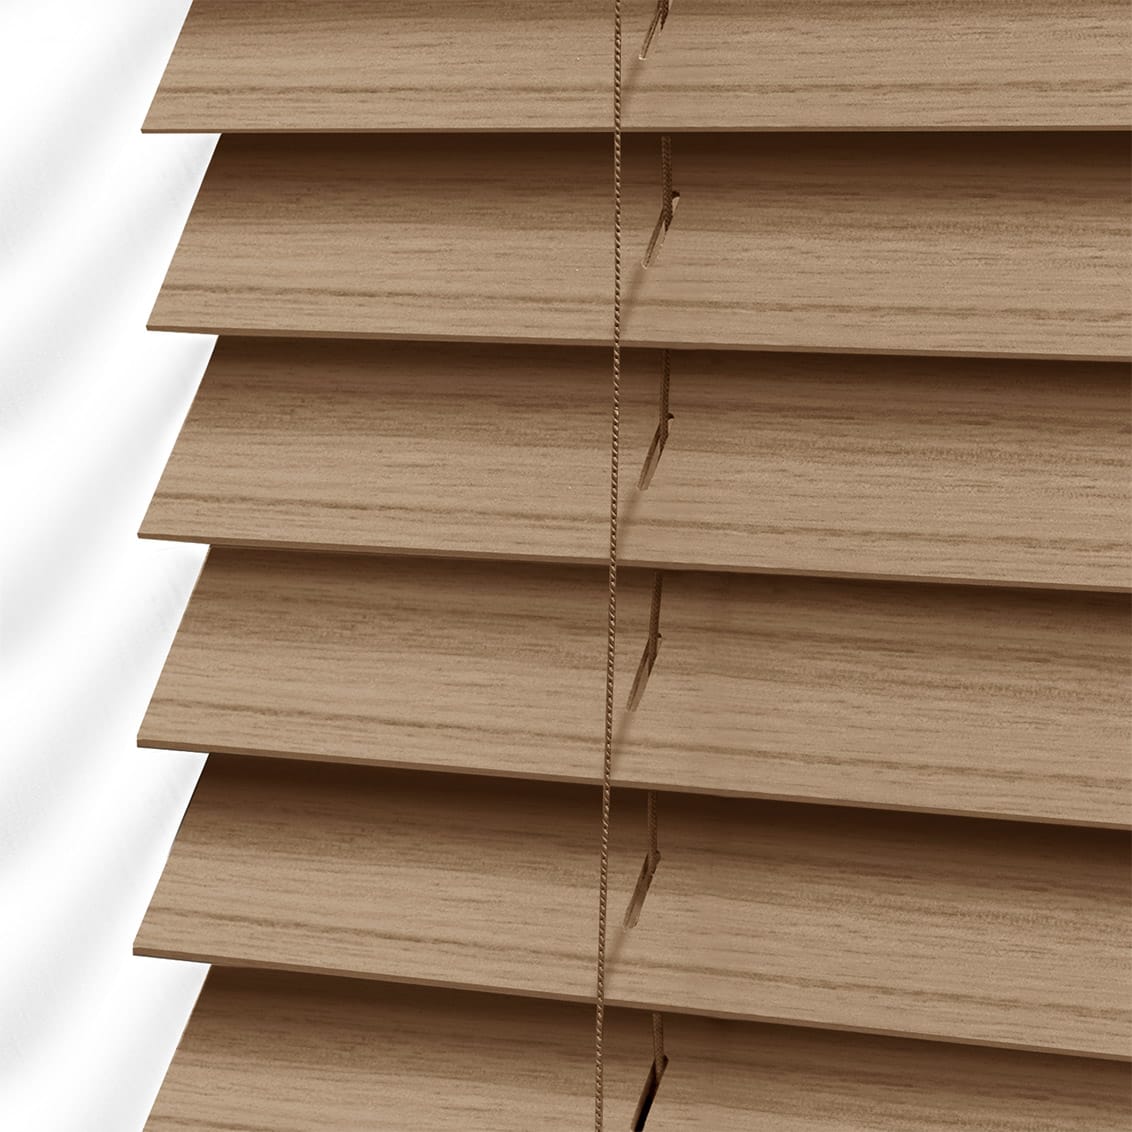 Solid Paulownia wood blinds supplier china, Wood blinds manufacturer china